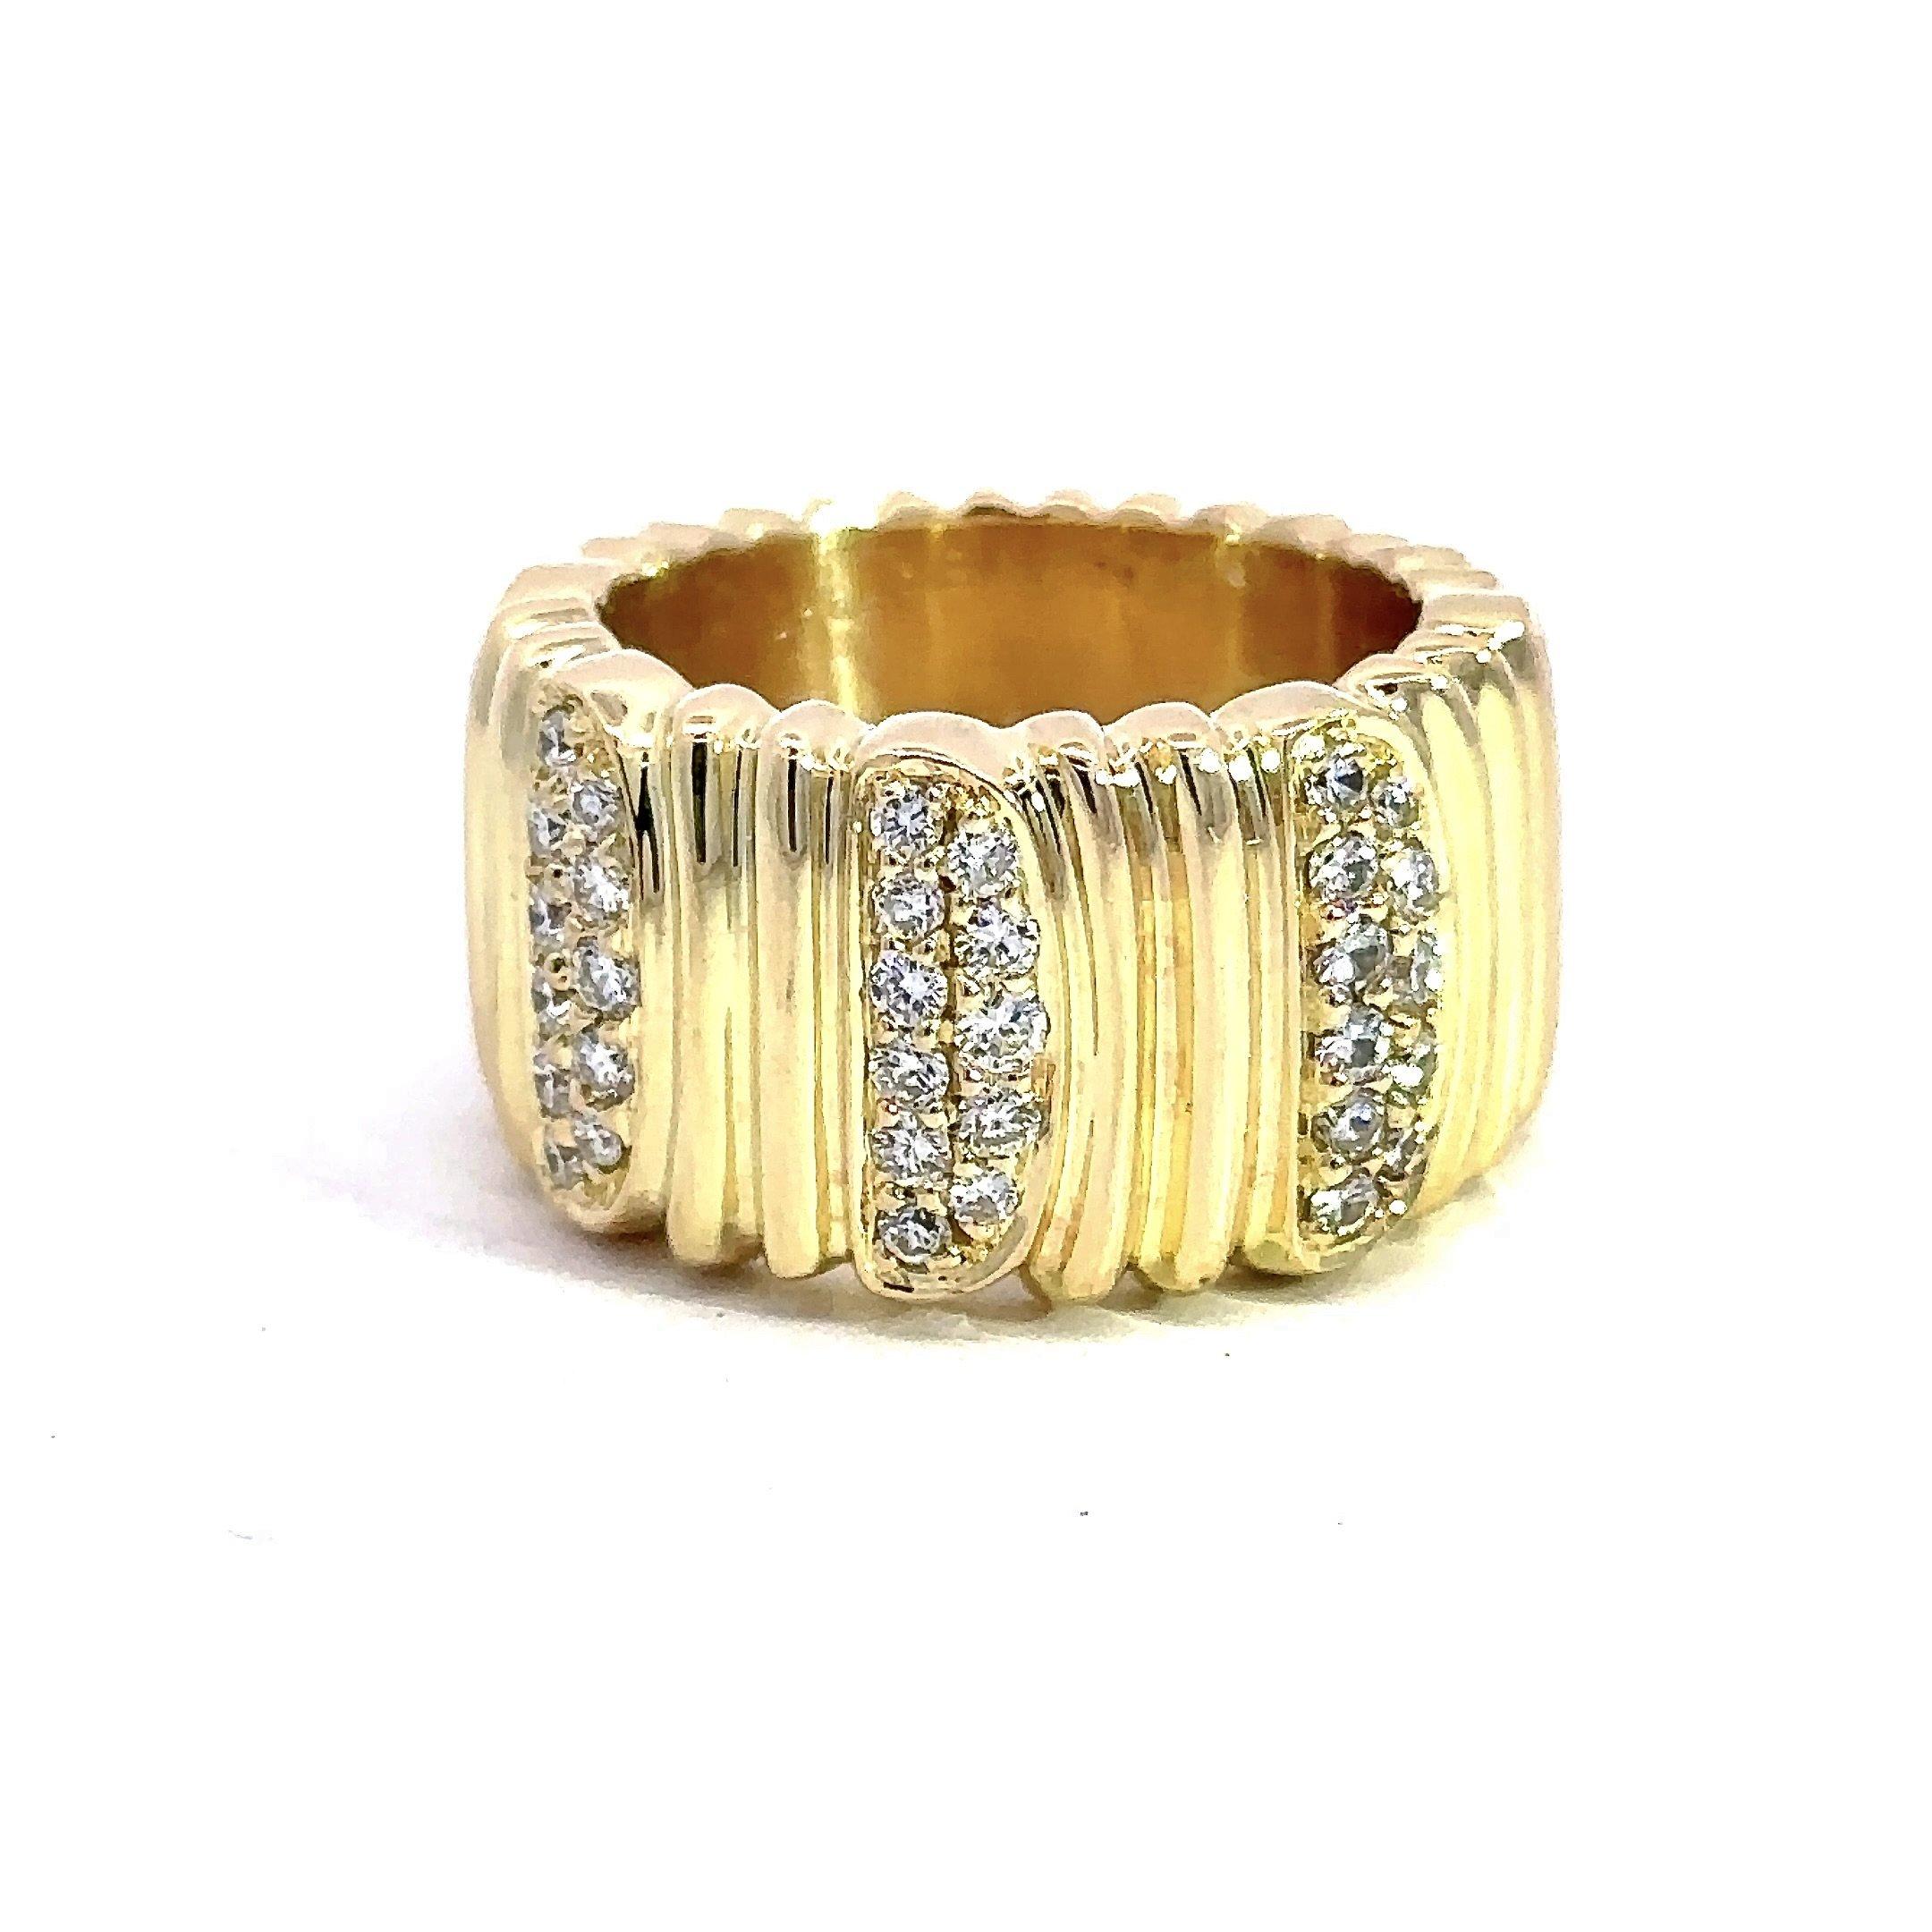 This Cartier “Golden Helmet” textured band is crafted in 18KT yellow gold with an embellishment of sparkling round diamonds, F Color VS Clarity, which add dimension and flash to this signature Cartier piece. It is stamped Cartier 1993. The ring is a